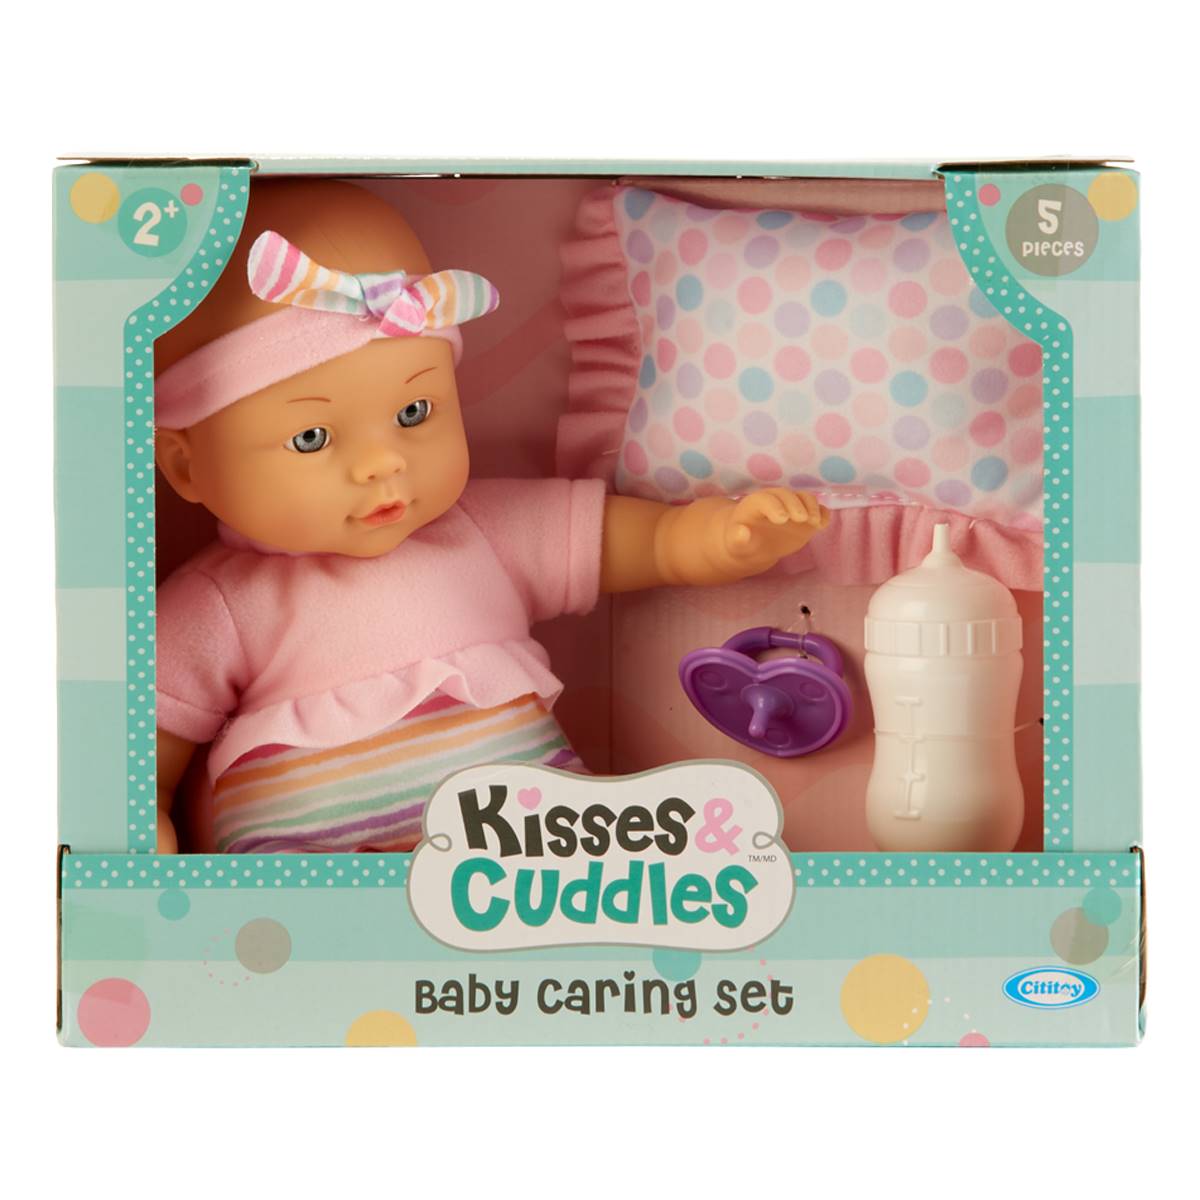 Kisses & Cuddles 12in. Baby Caring Set